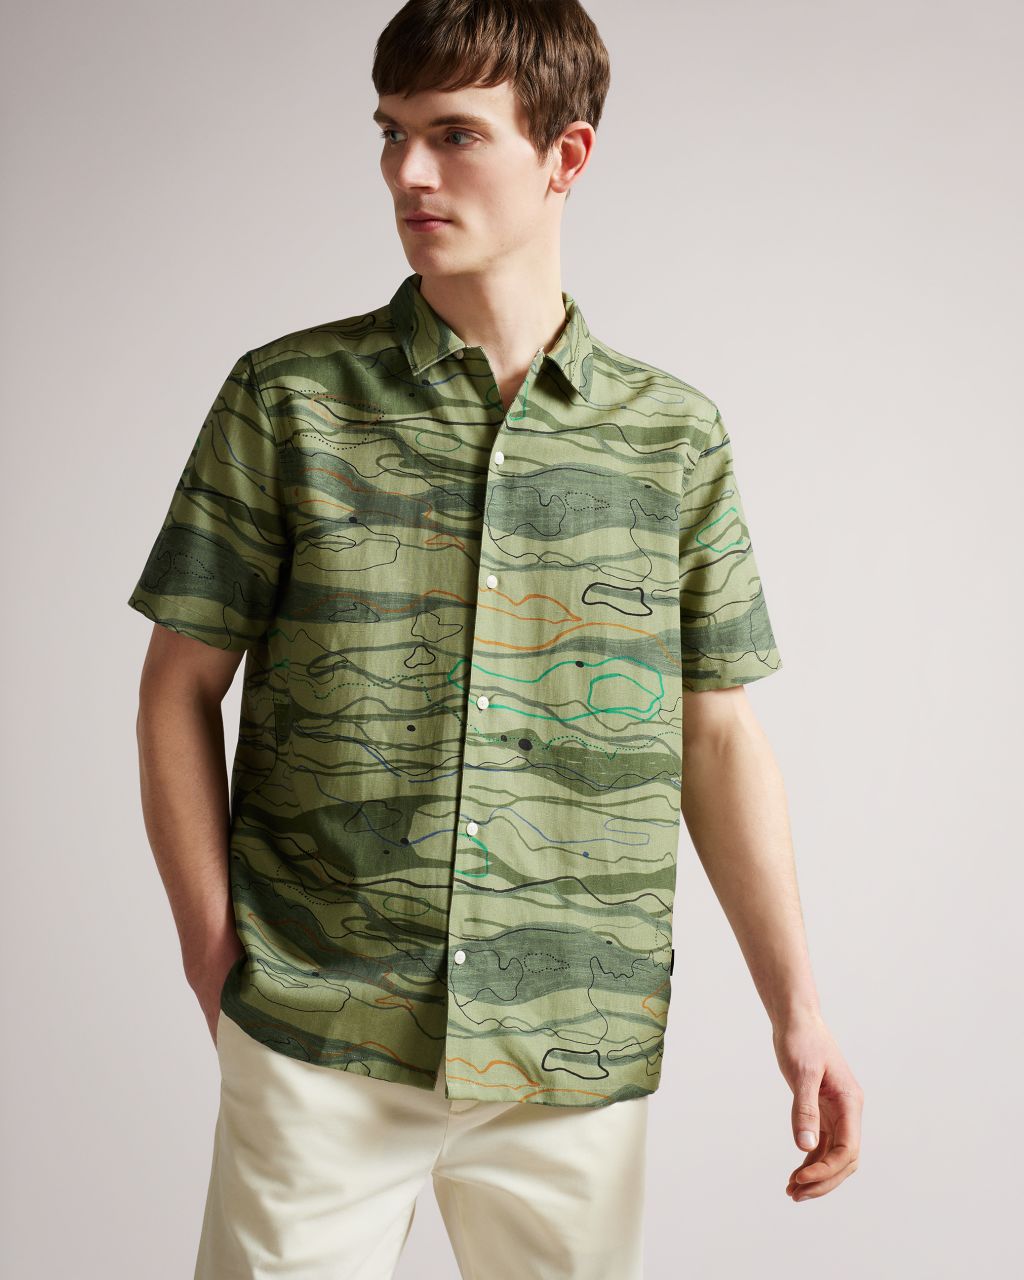 Ted Baker Men's Short Sleeve Wave Print Shirt in Light Green, Briary